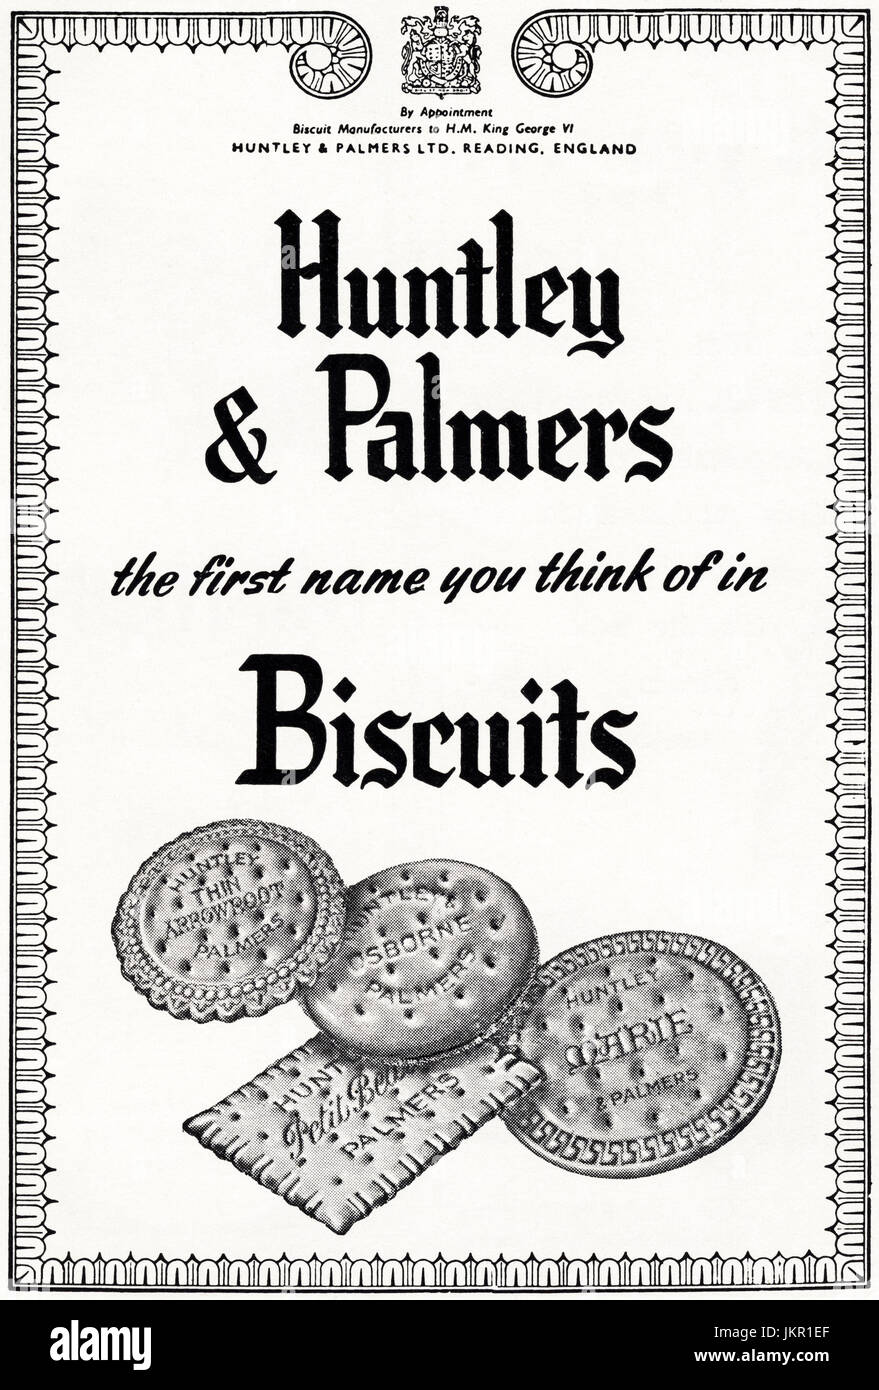 1950s old vintage original advertisement advertising Huntley & Palmers biscuits by Royal Appointment to H.M. King George VI in magazine circa 1950 Stock Photo